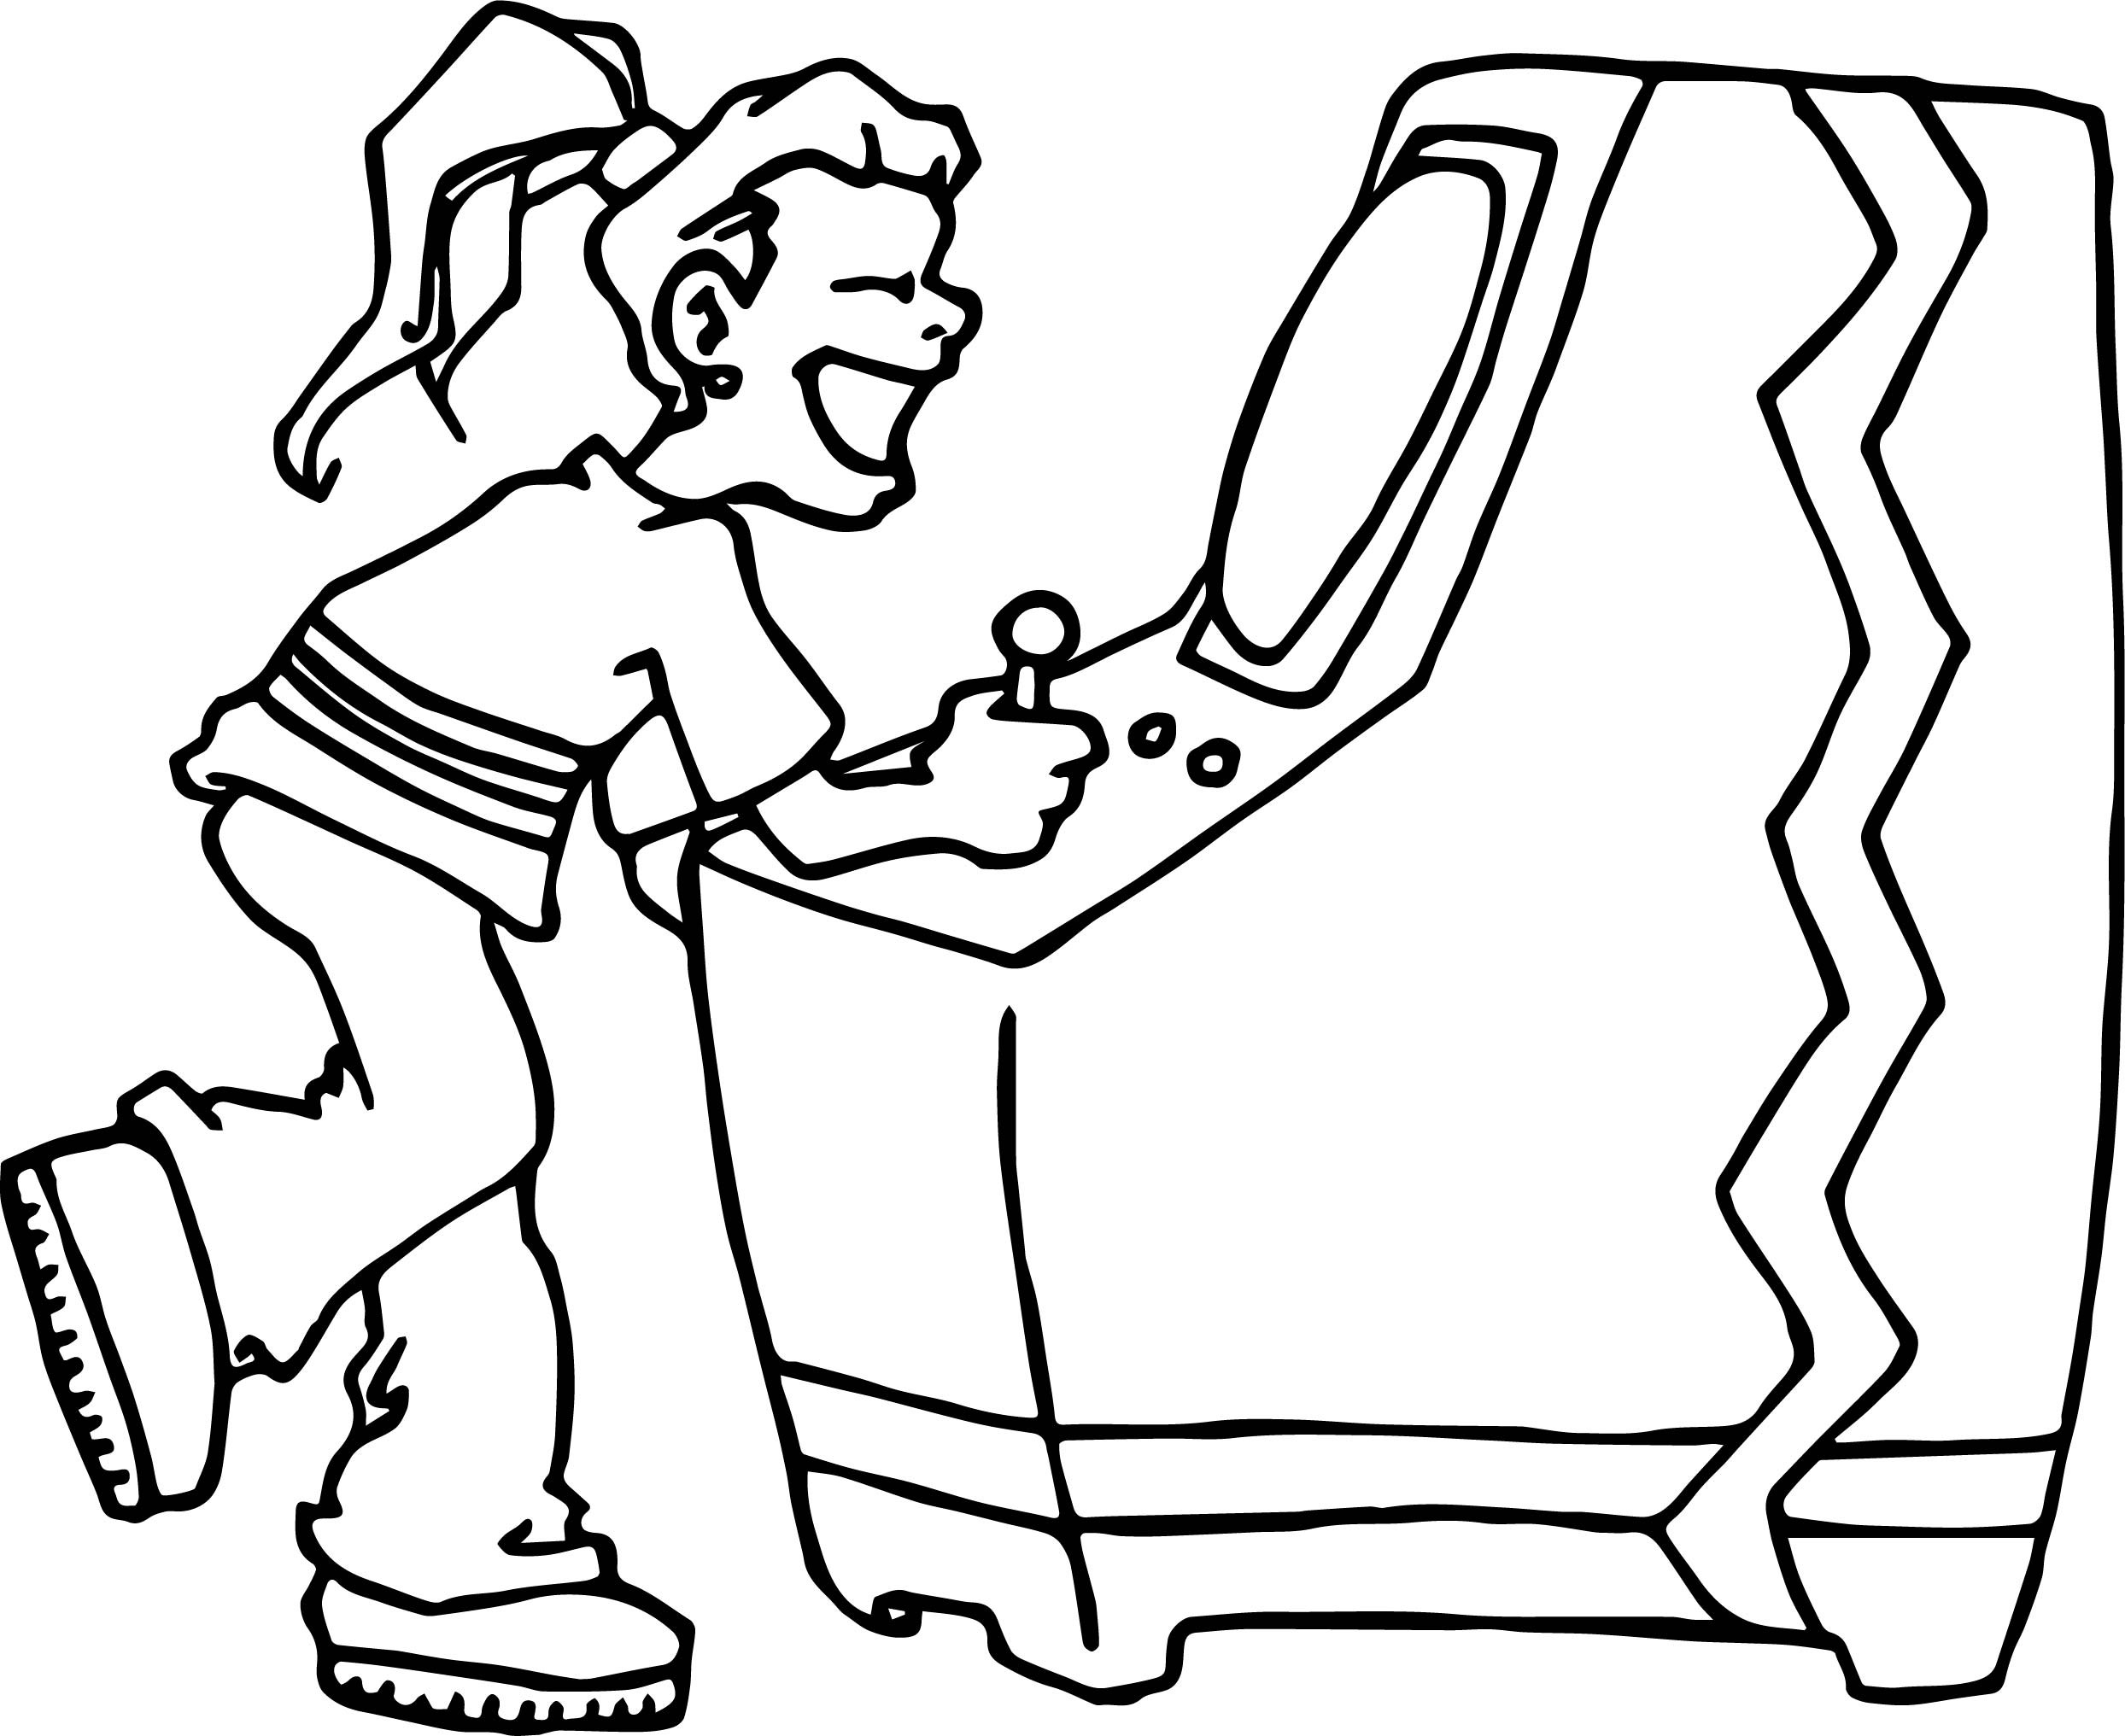 Coloring Book Games
 Video Game Coloring Pages coloringsuite